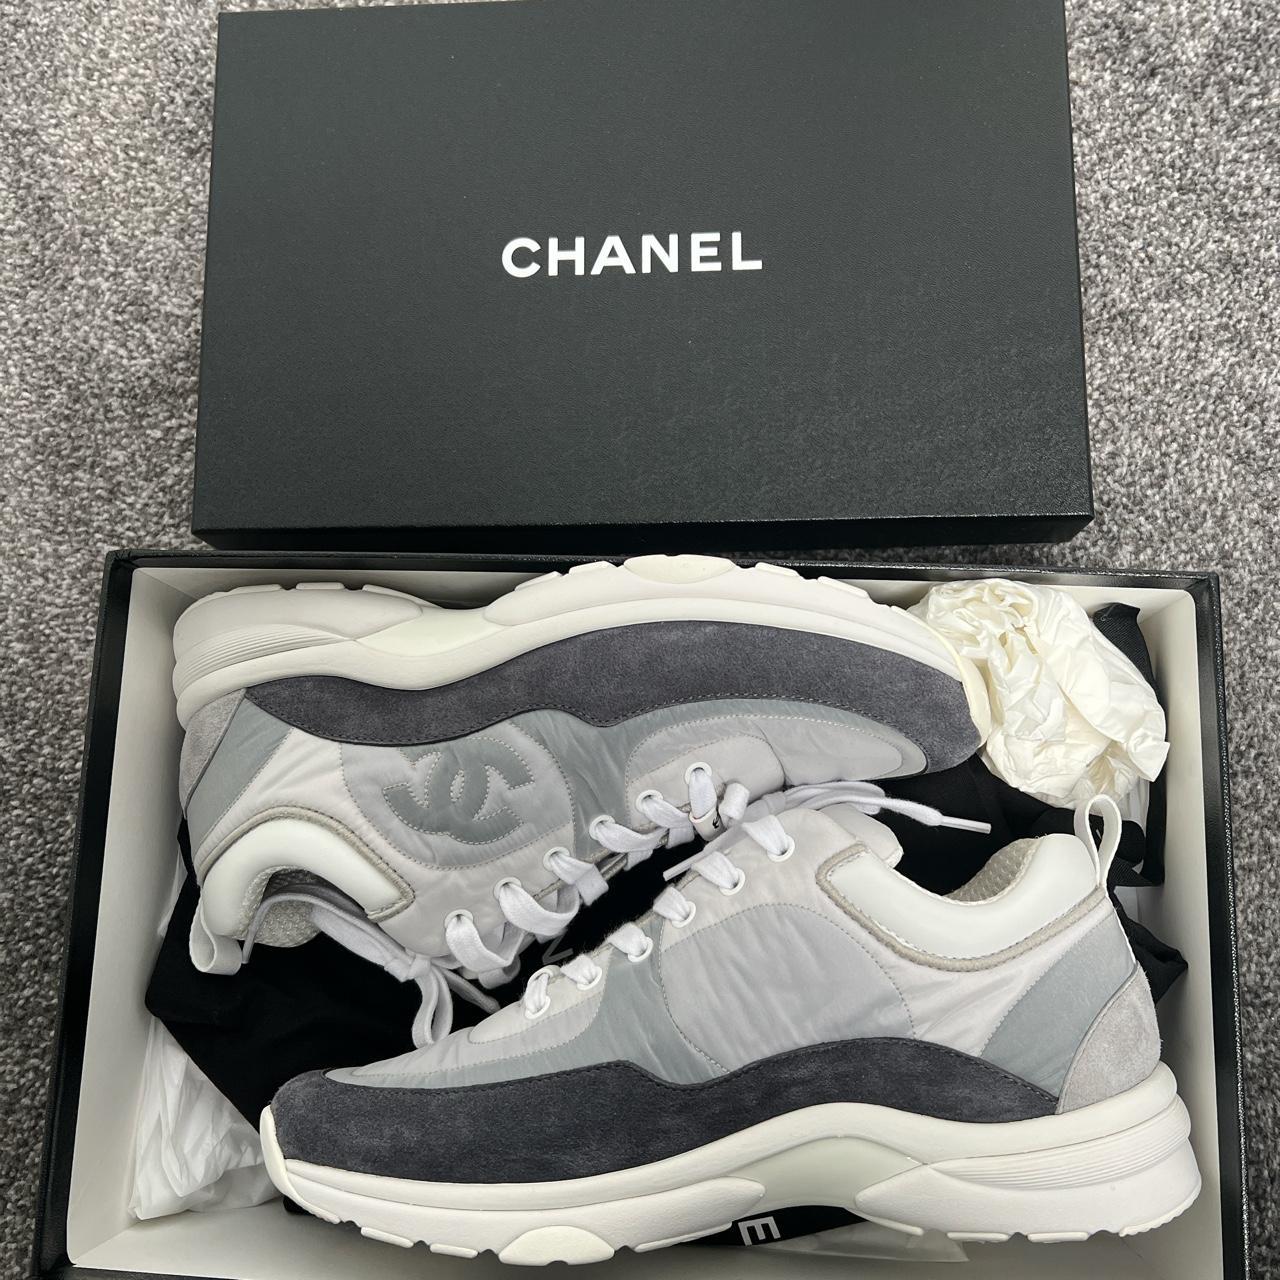 Chanel Runners worn once - Depop